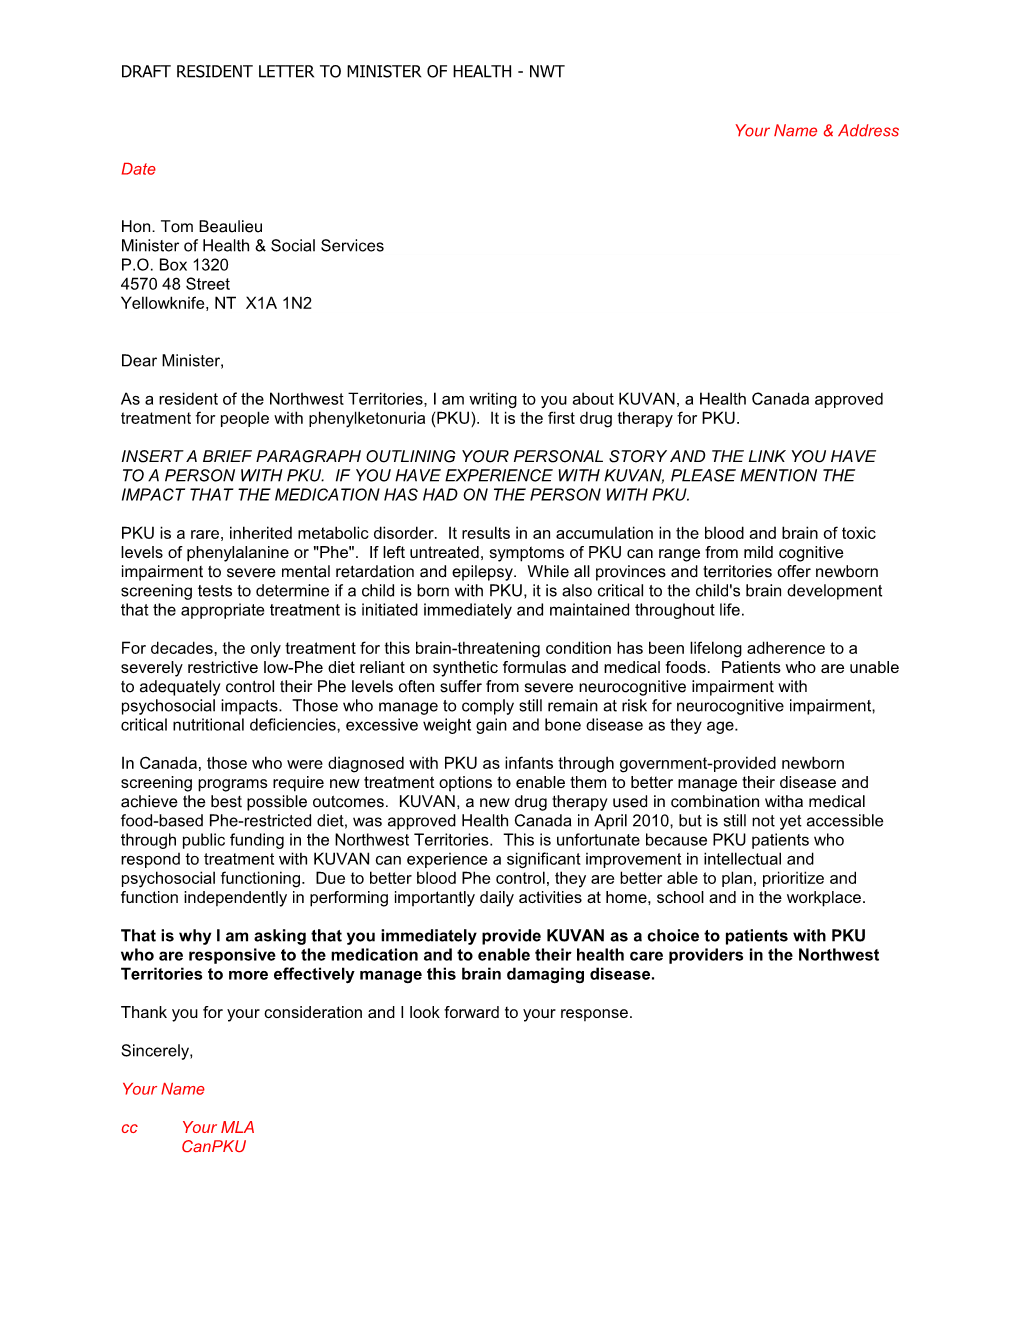 Draft Resident Letter to Minister of Health - Nwt